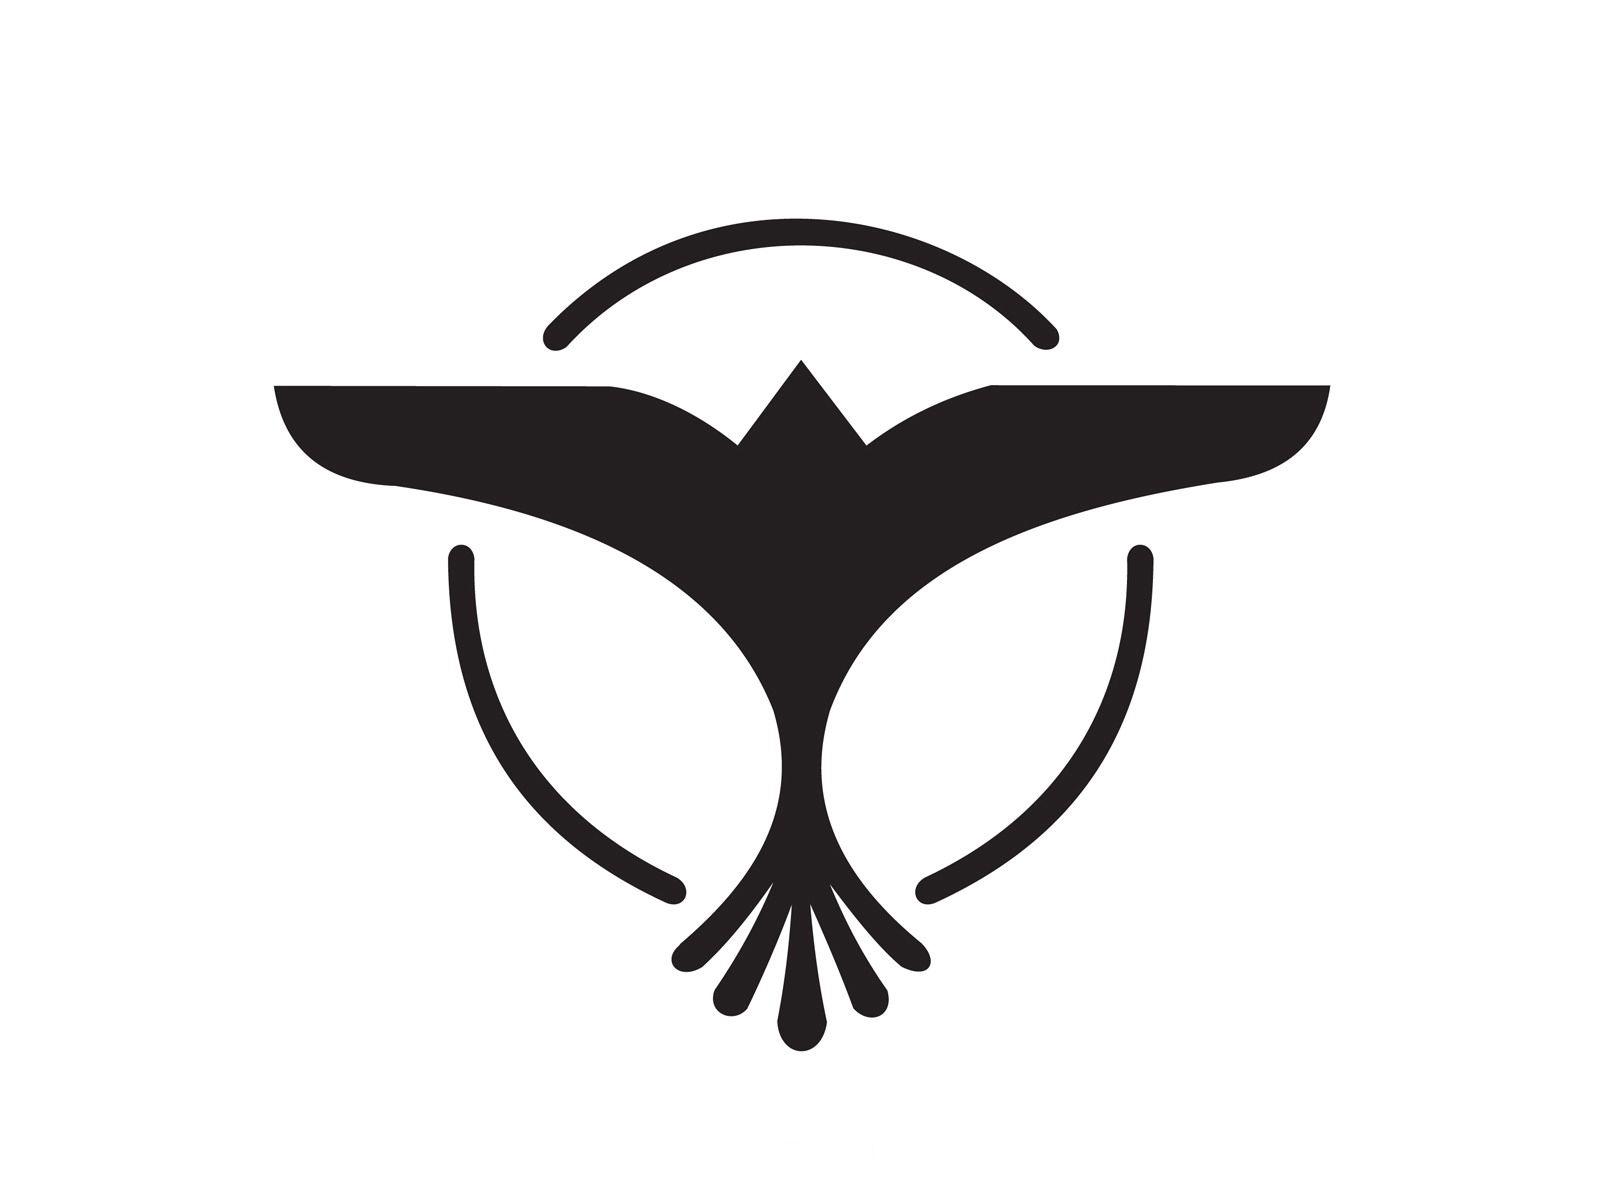 Tiesto Logo - The famous bird logo. Any Tiësto fan will be able to recognise this